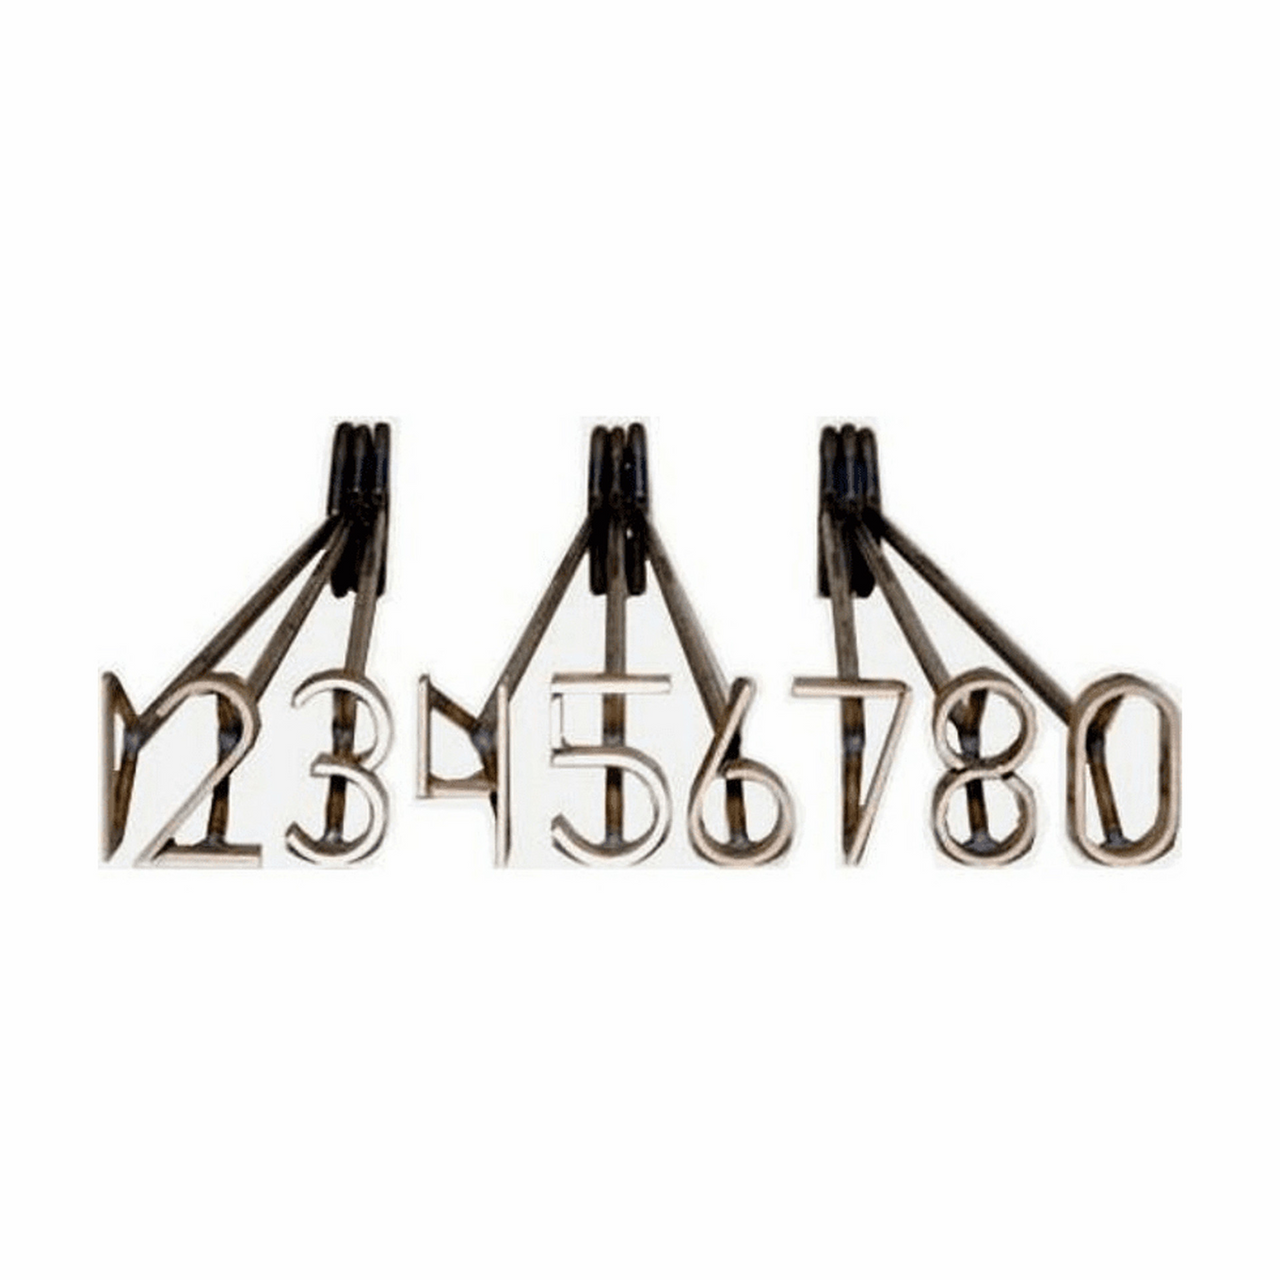 Fire Heated Stainless Brand Number Set - 2"